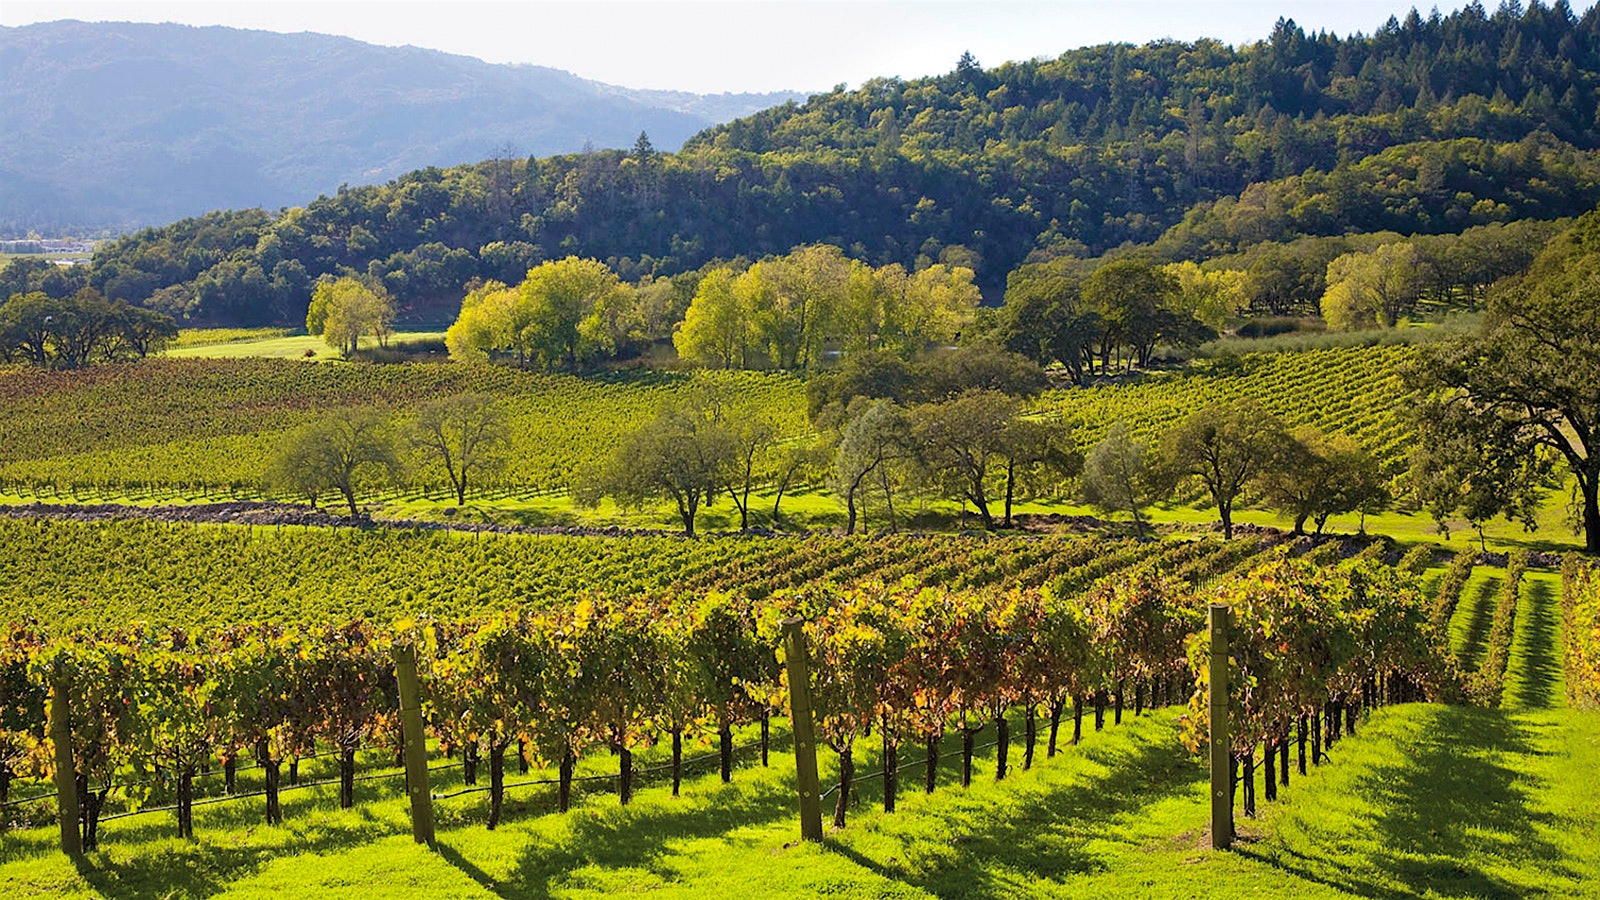  Lush vineyard belonging to Joseph Phelps winery, with forested hillsides in the background